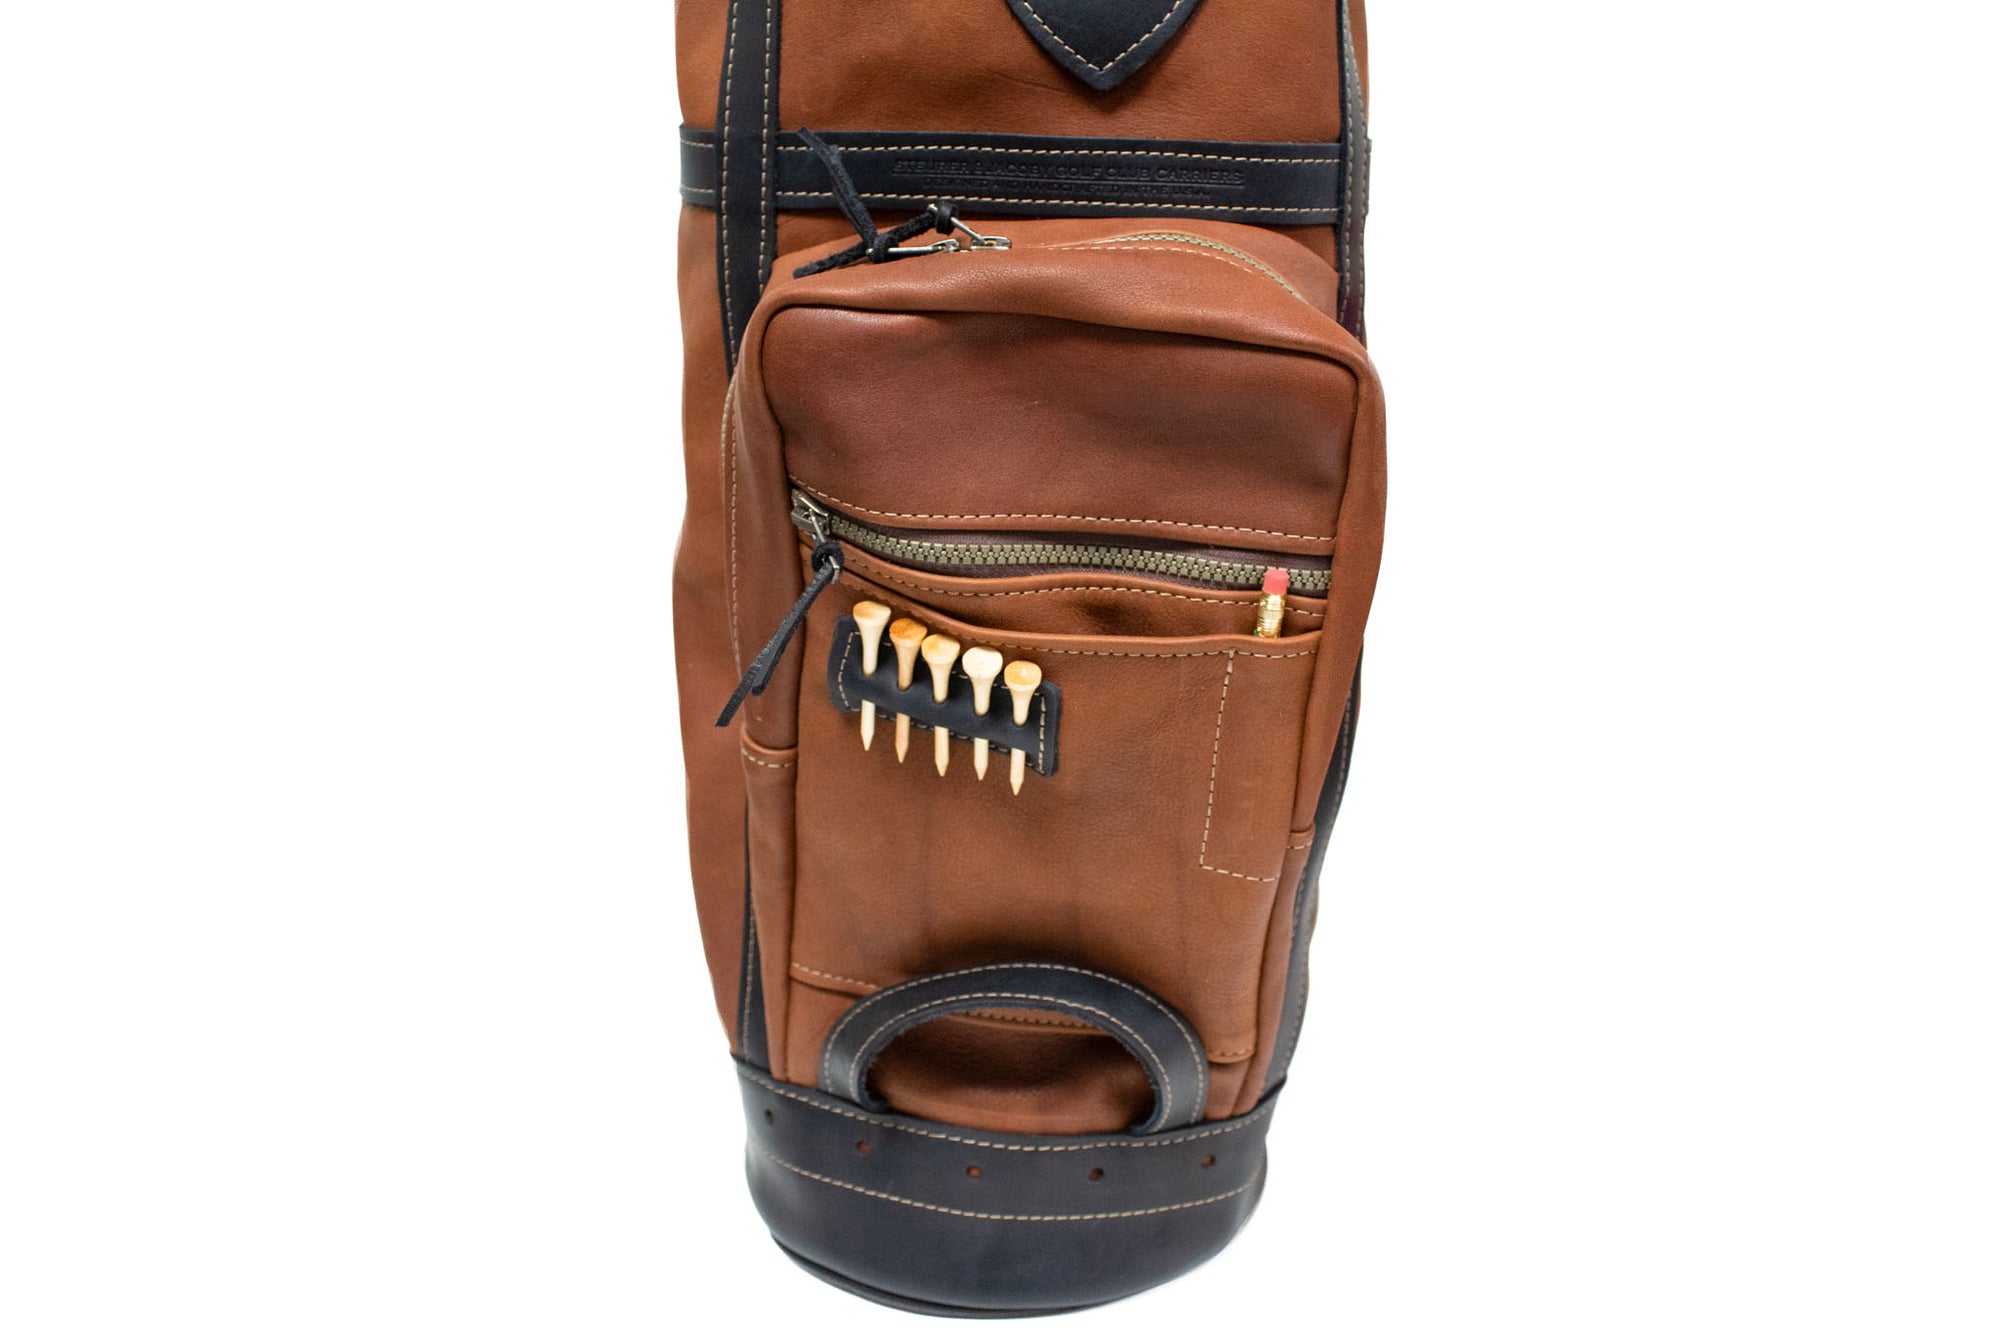 Chestnut and Black Leather Staff Style Golf Bag Ball Pocket- Steurer & Jacoby